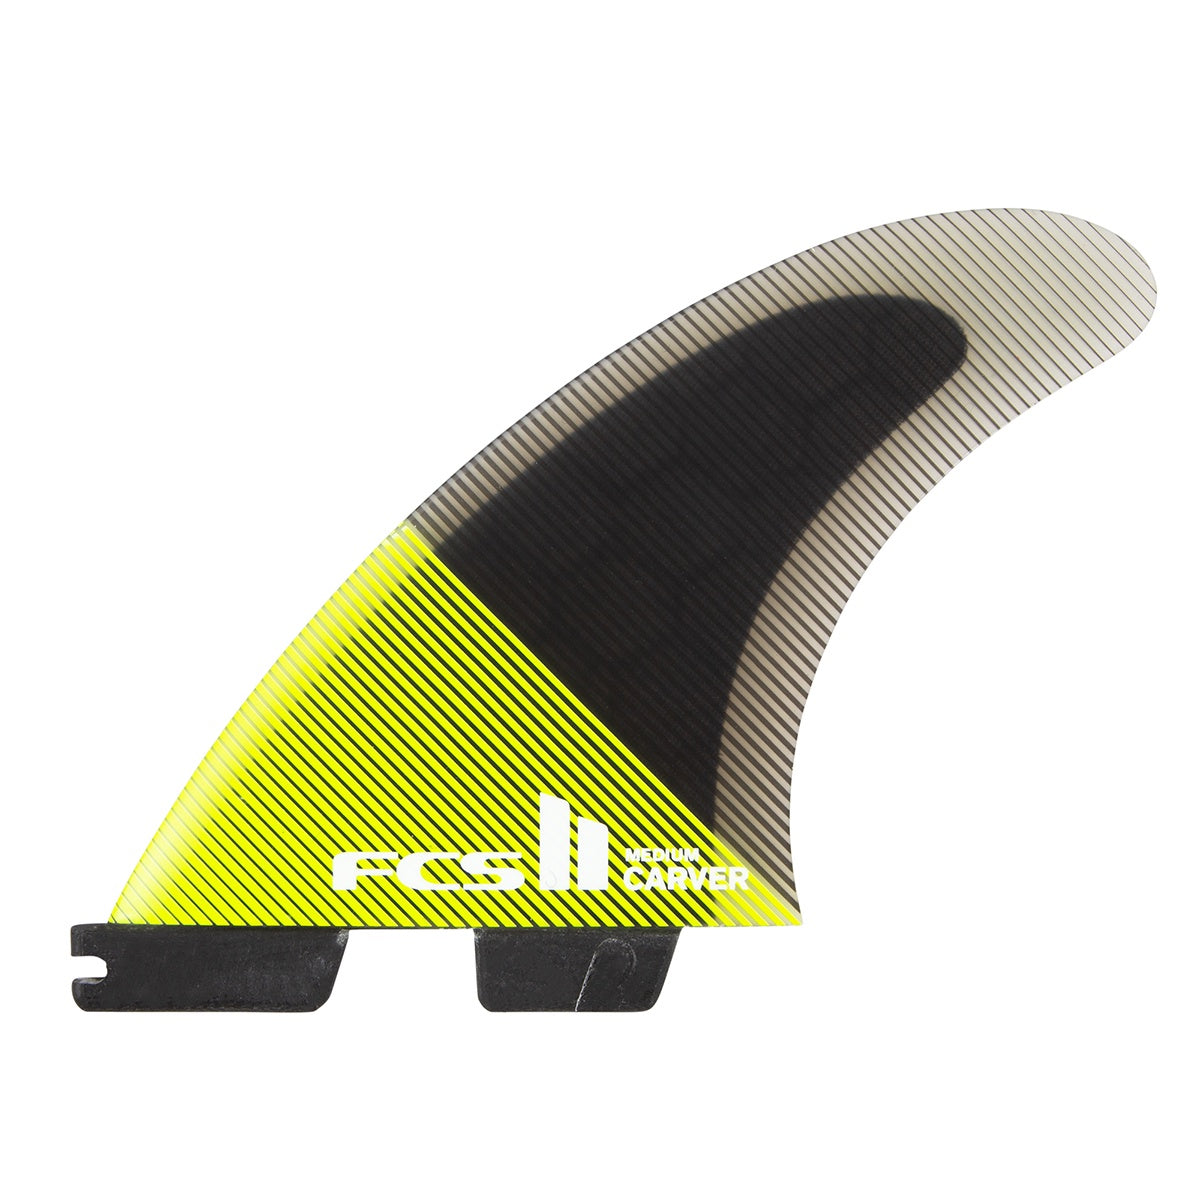 FCS II CARVER PC LARGE surfboard FIN SET black and yellow